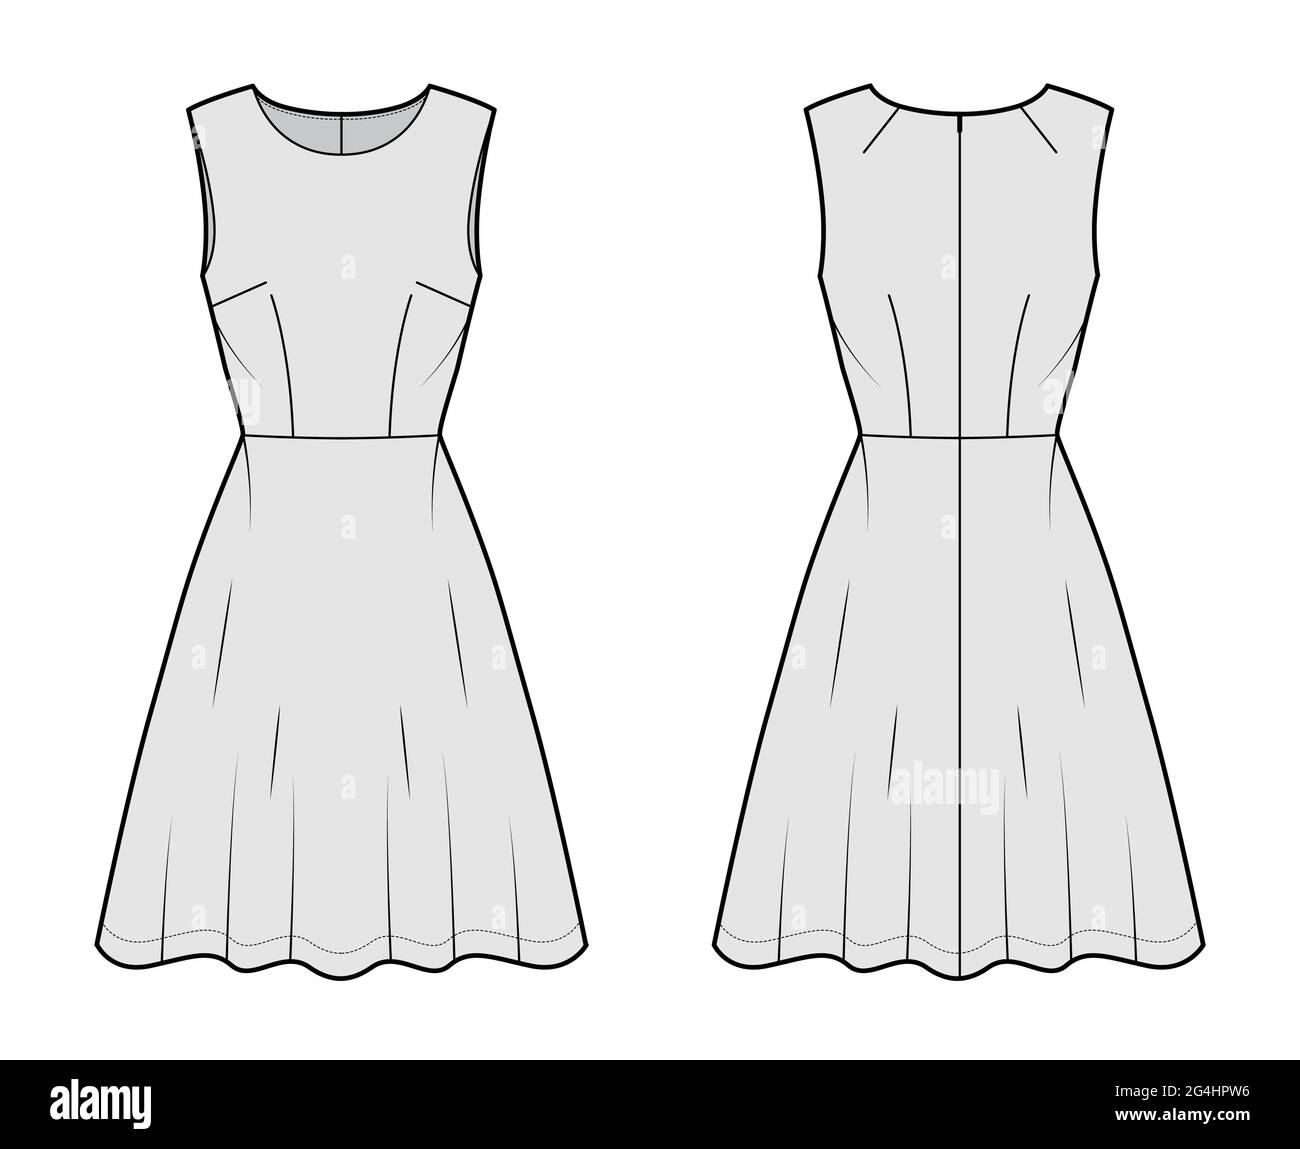 Dress flared skater technical fashion illustration with sleeveless, fitted body, knee length semi-circular skirt. Flat apparel front, back, grey color Stock Vector